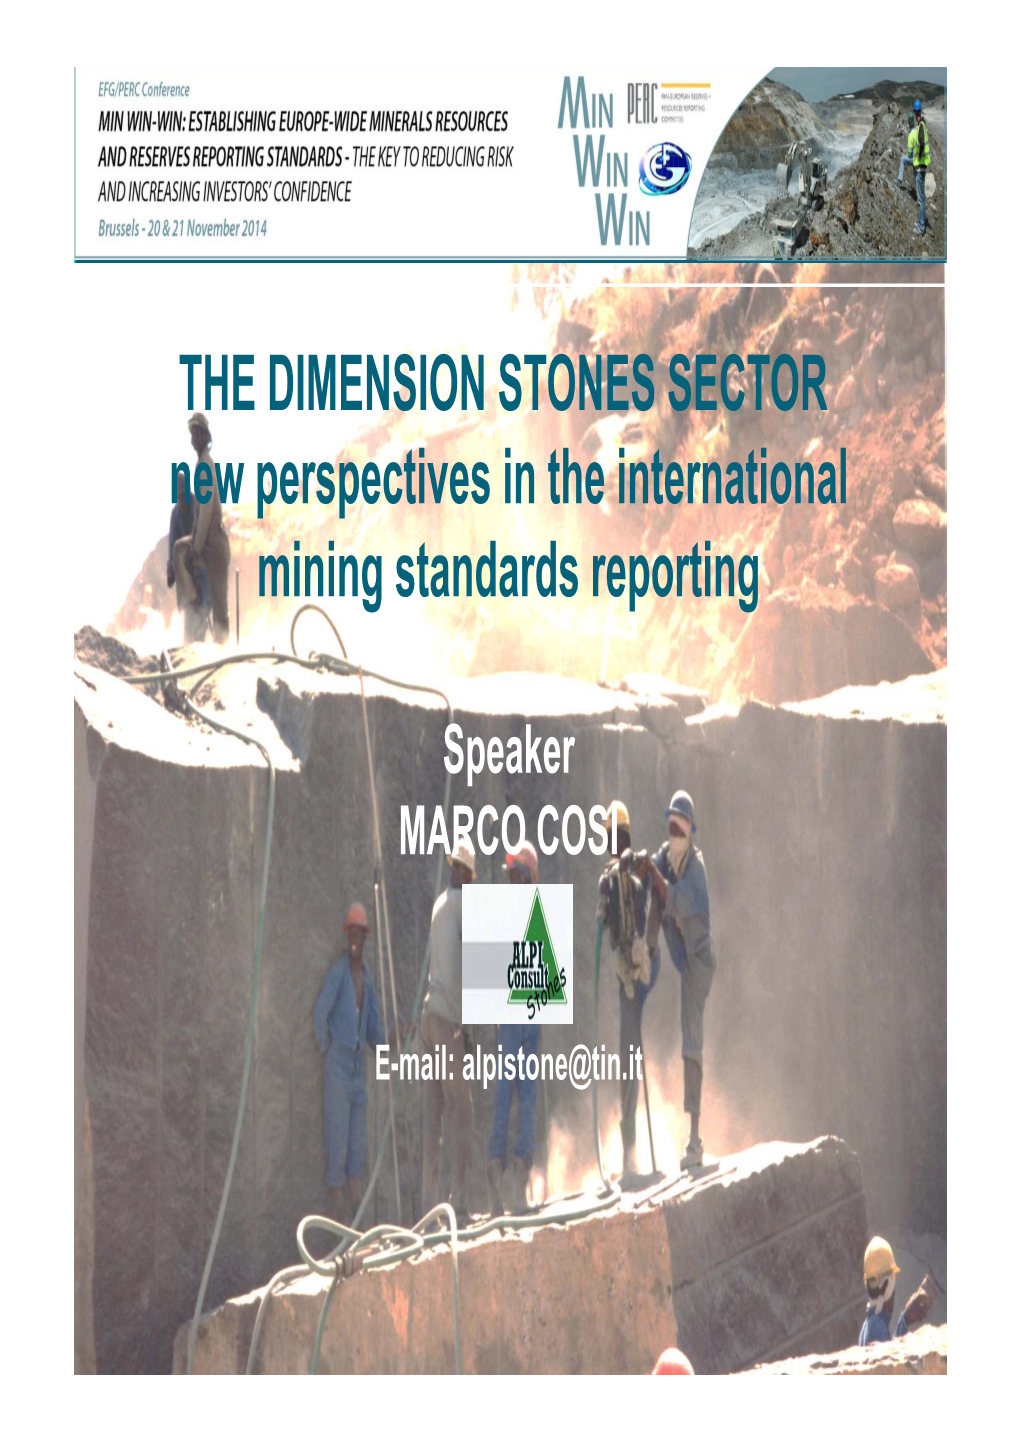 THE DIMENSION STONES SECTOR New Perspectives in the International Mining Standards Reporting